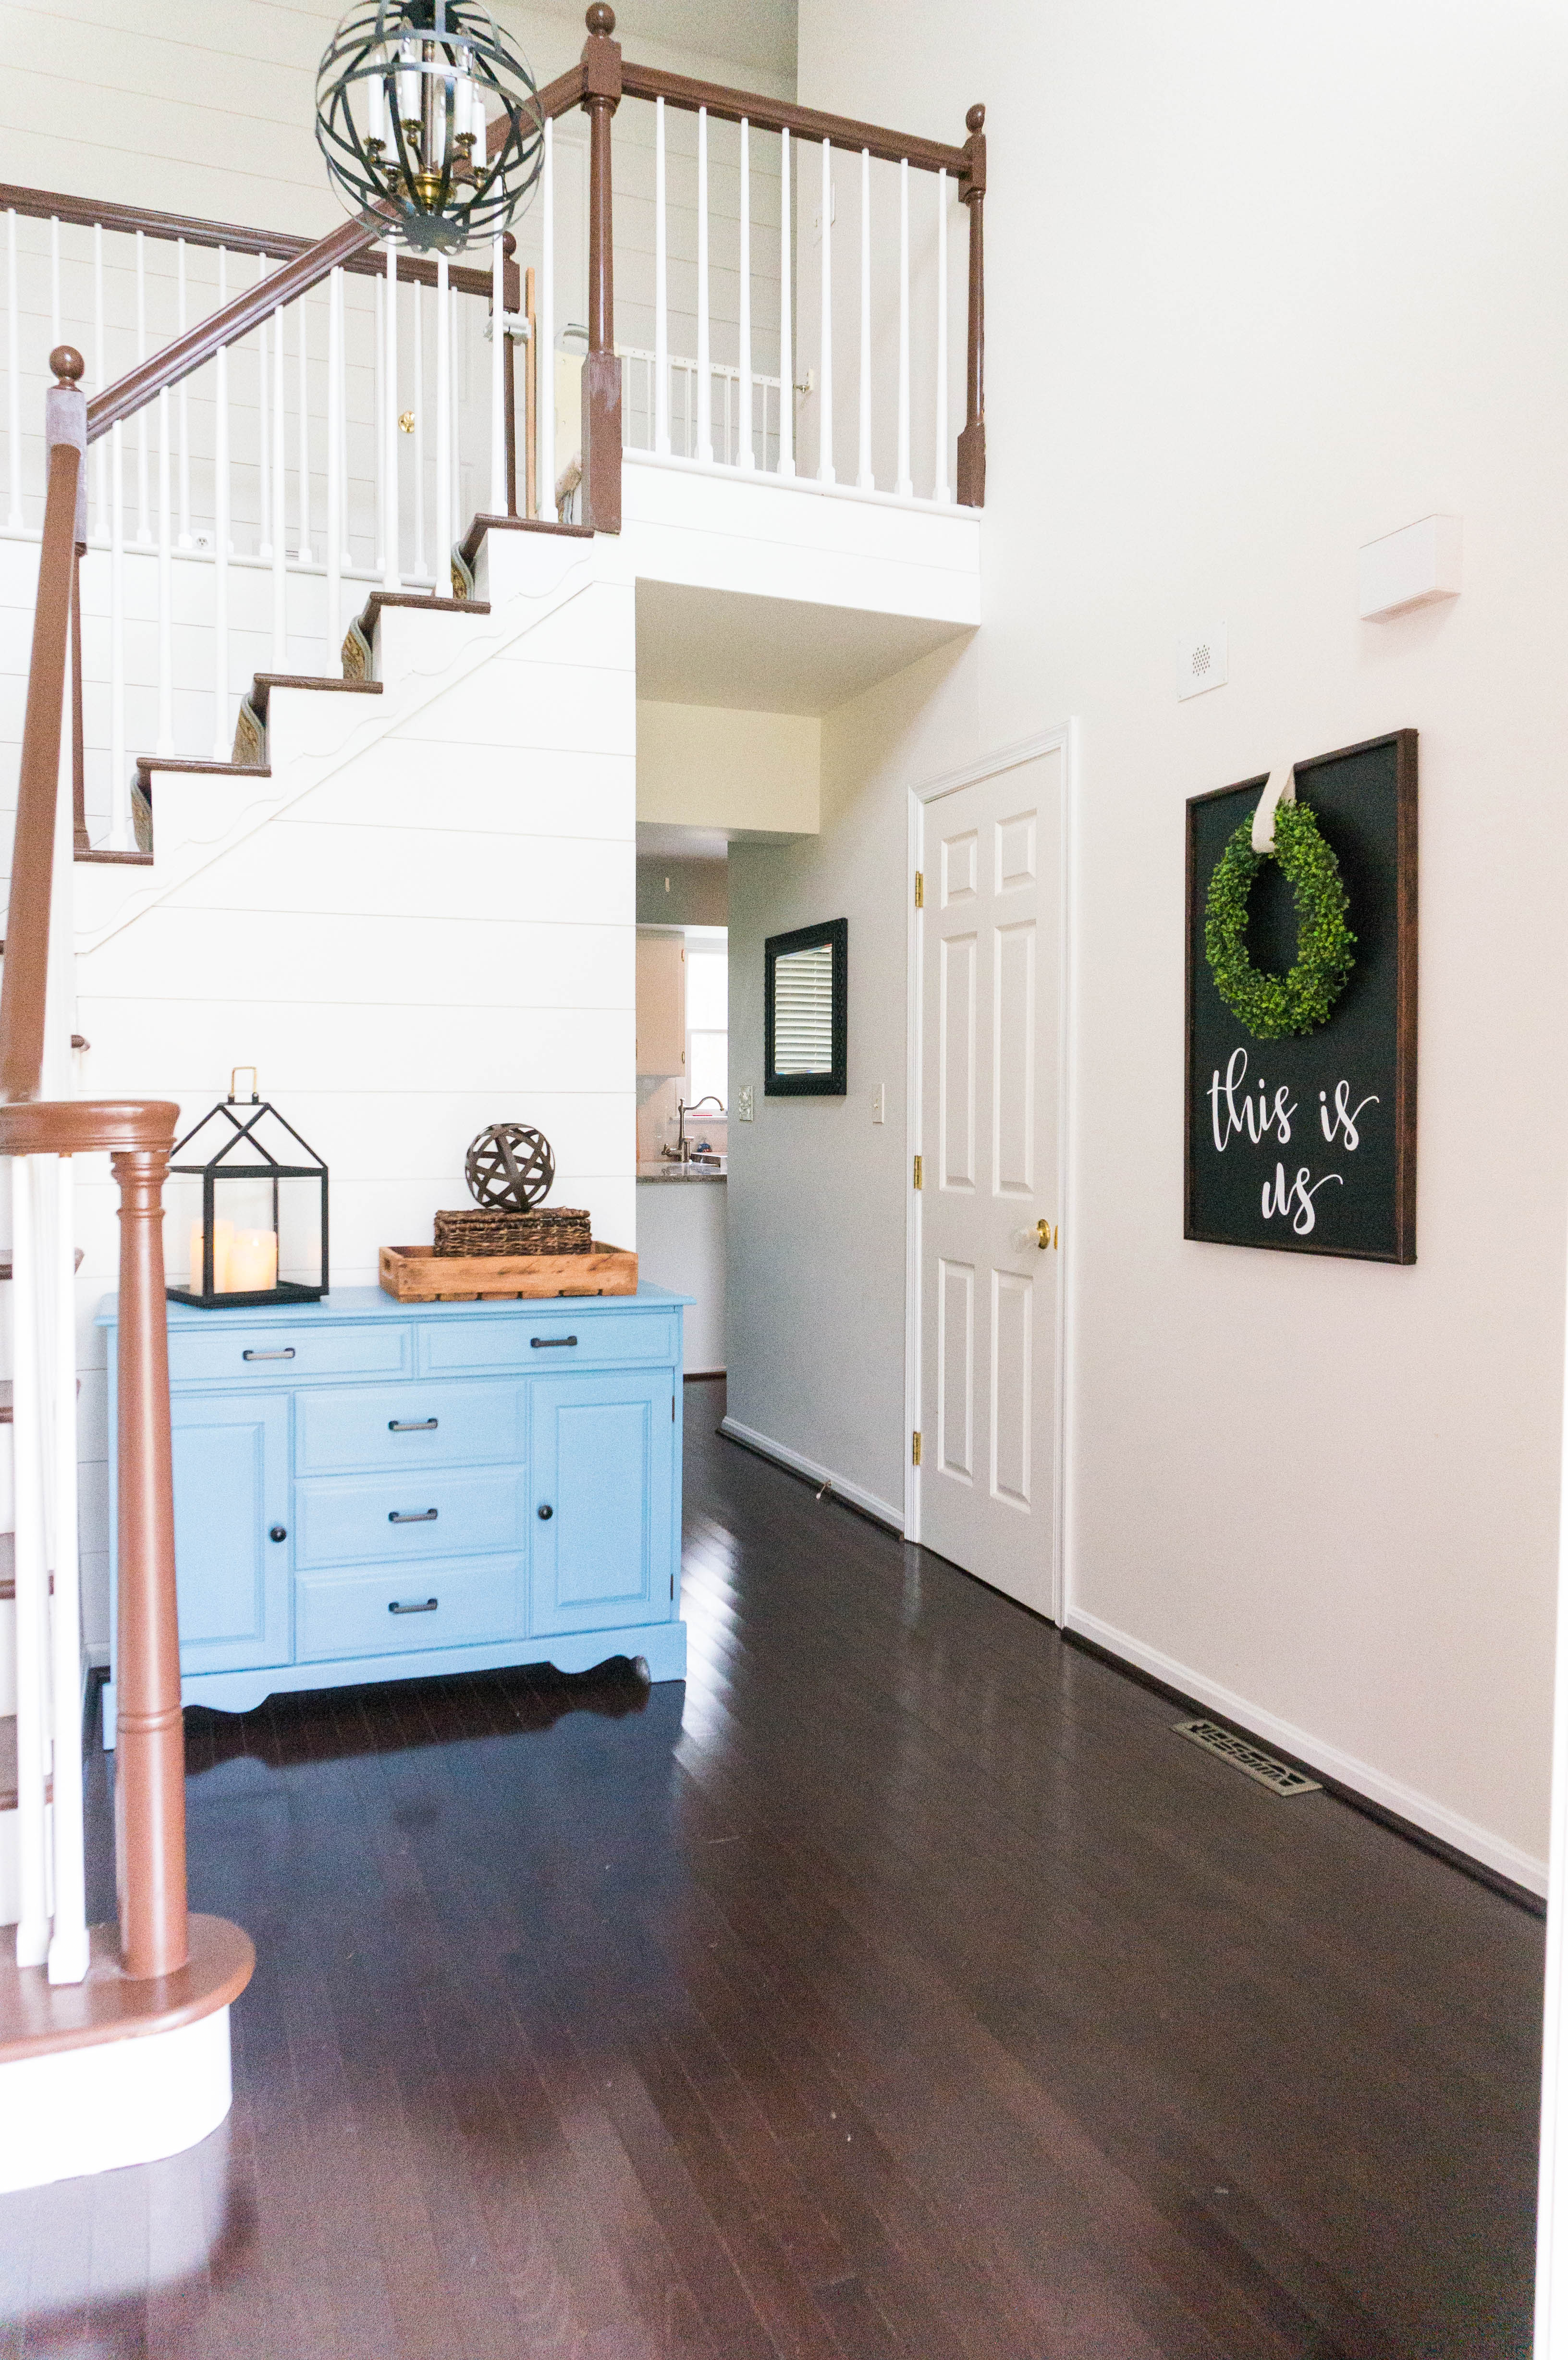 Inexpensive entry remodel reveal. Find out how our farmhouse foyer turned out. Our fixer upper foyer needed a major redo. See how we rennovated our foyer on a budget. #farmhousedecor #farmhouse #fixerupper #foyer #entryway